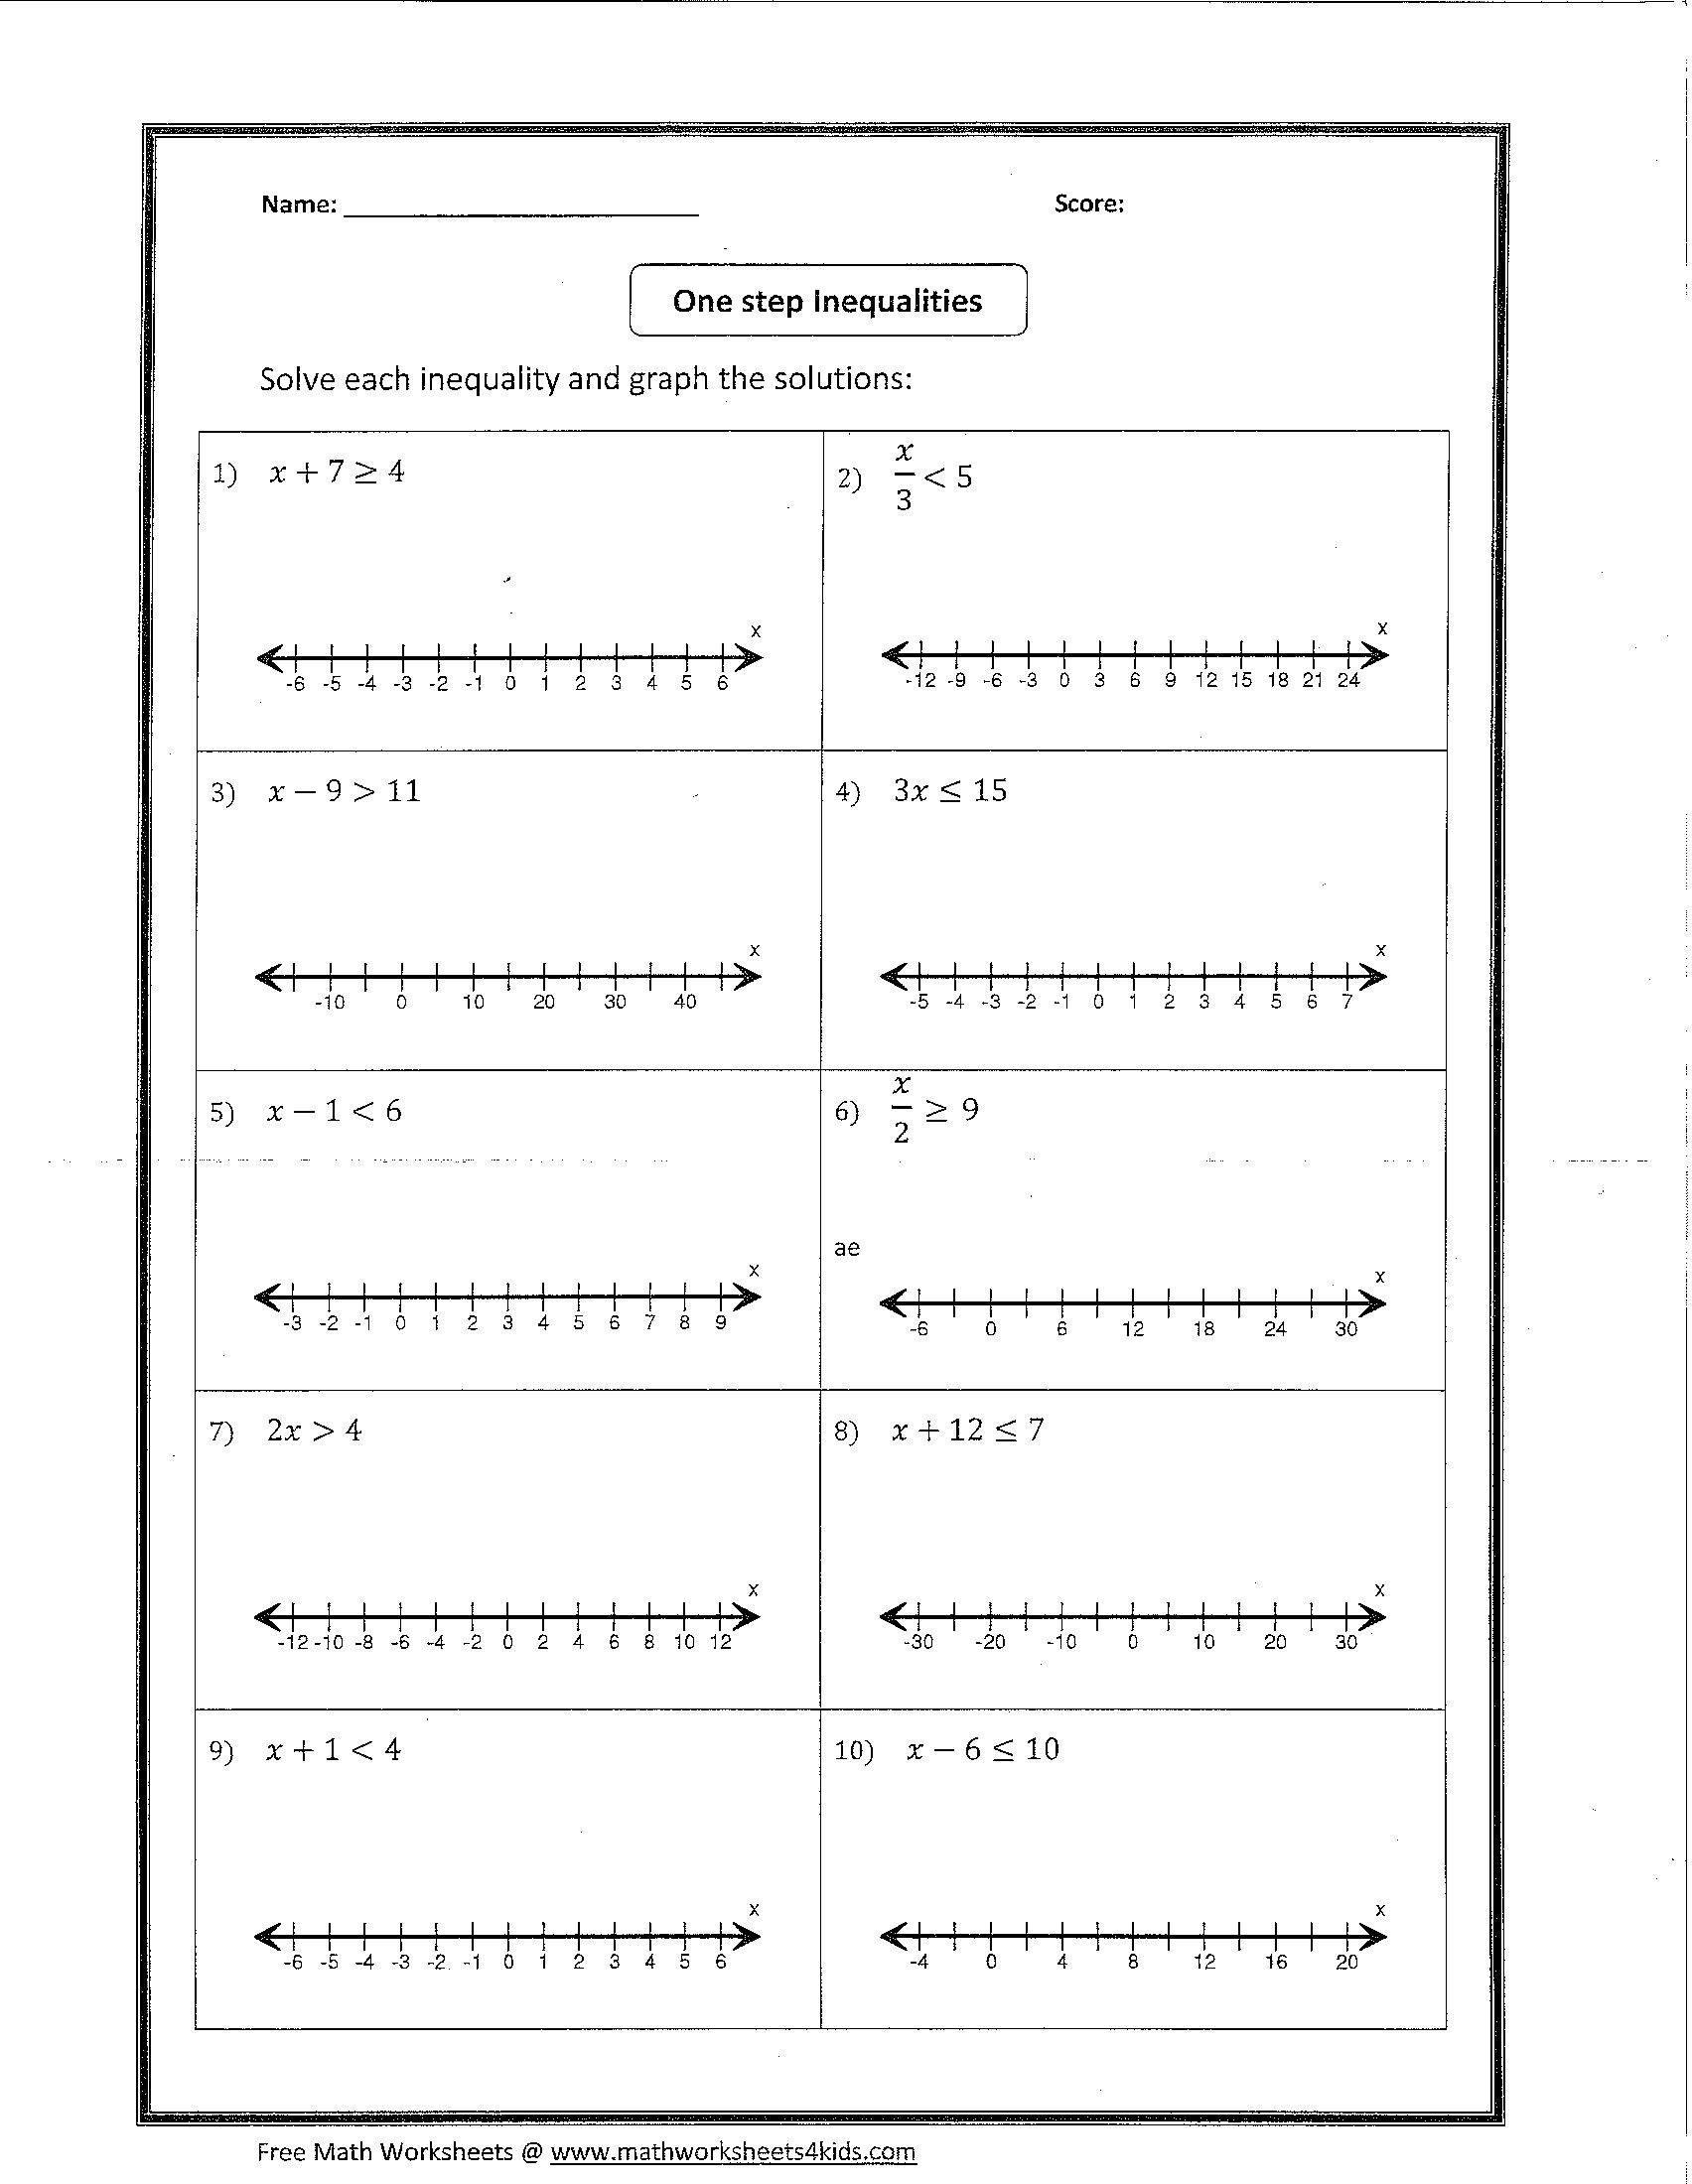 Solving Linear Inequalities Worksheet Lovely Linear Equations Worksheet with Answers